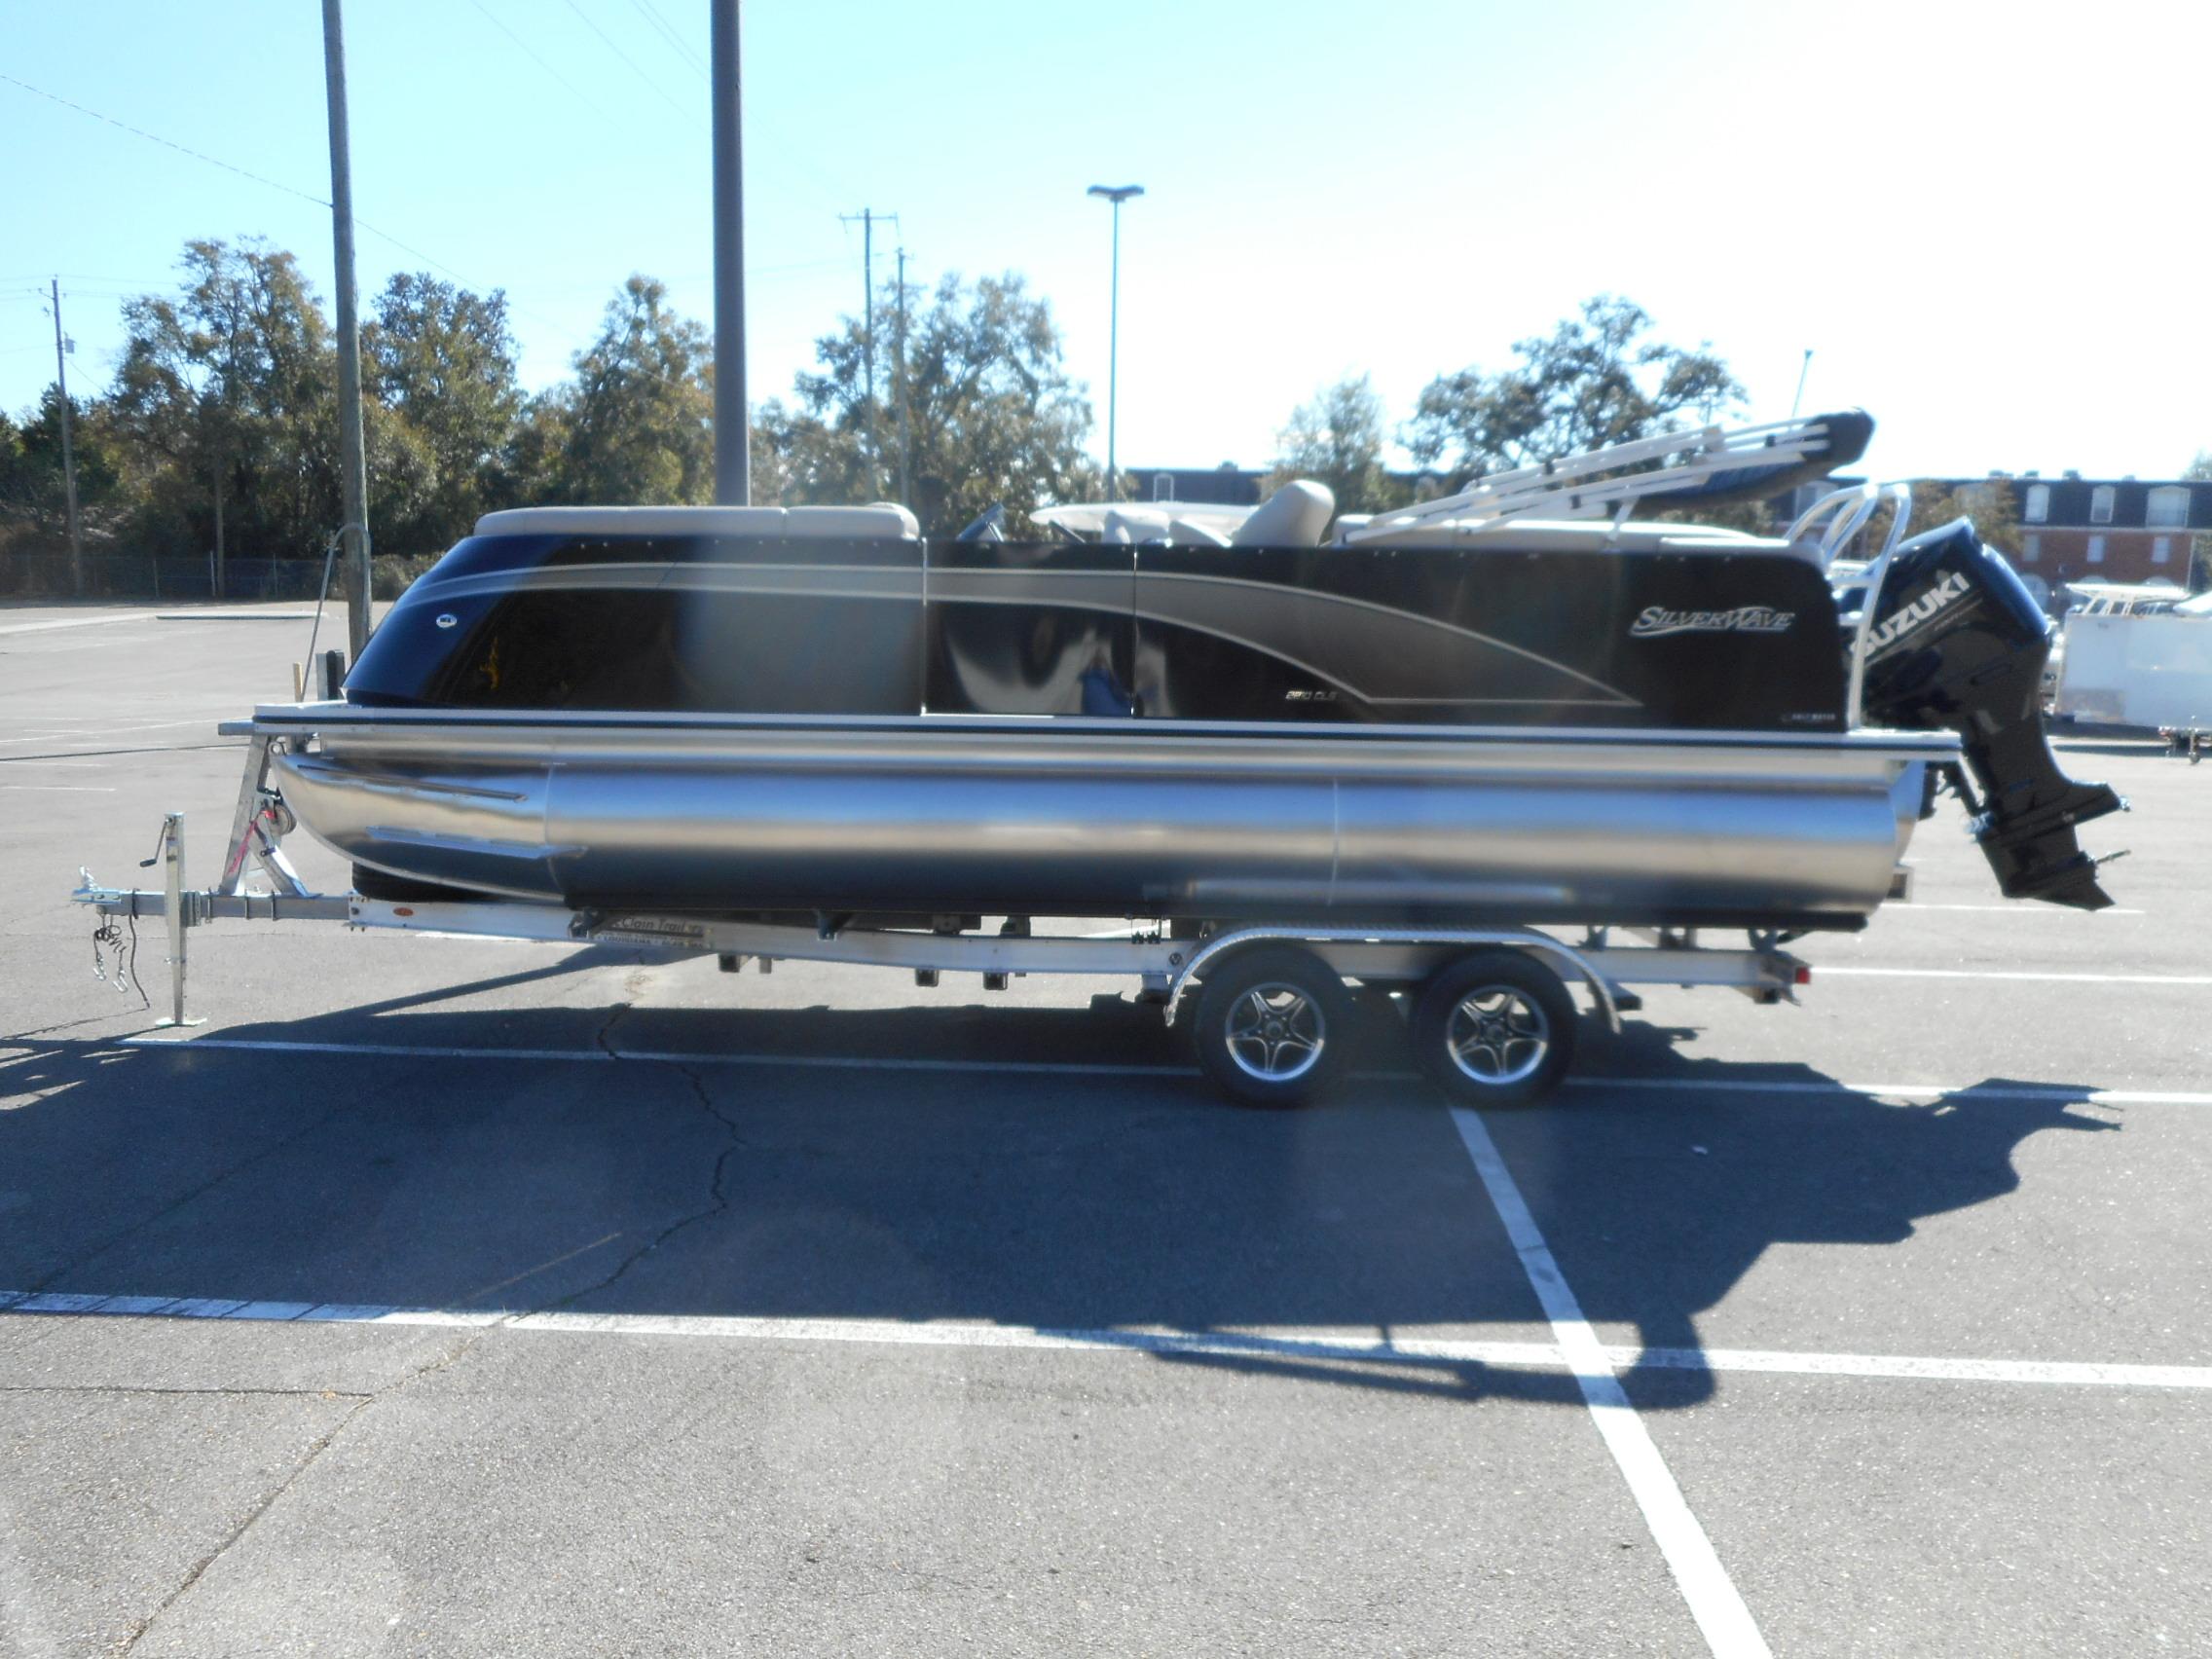 New  2022 22' Silver Wave 2210 SW3 CLS Pontoon Boat in Slidell, Louisiana